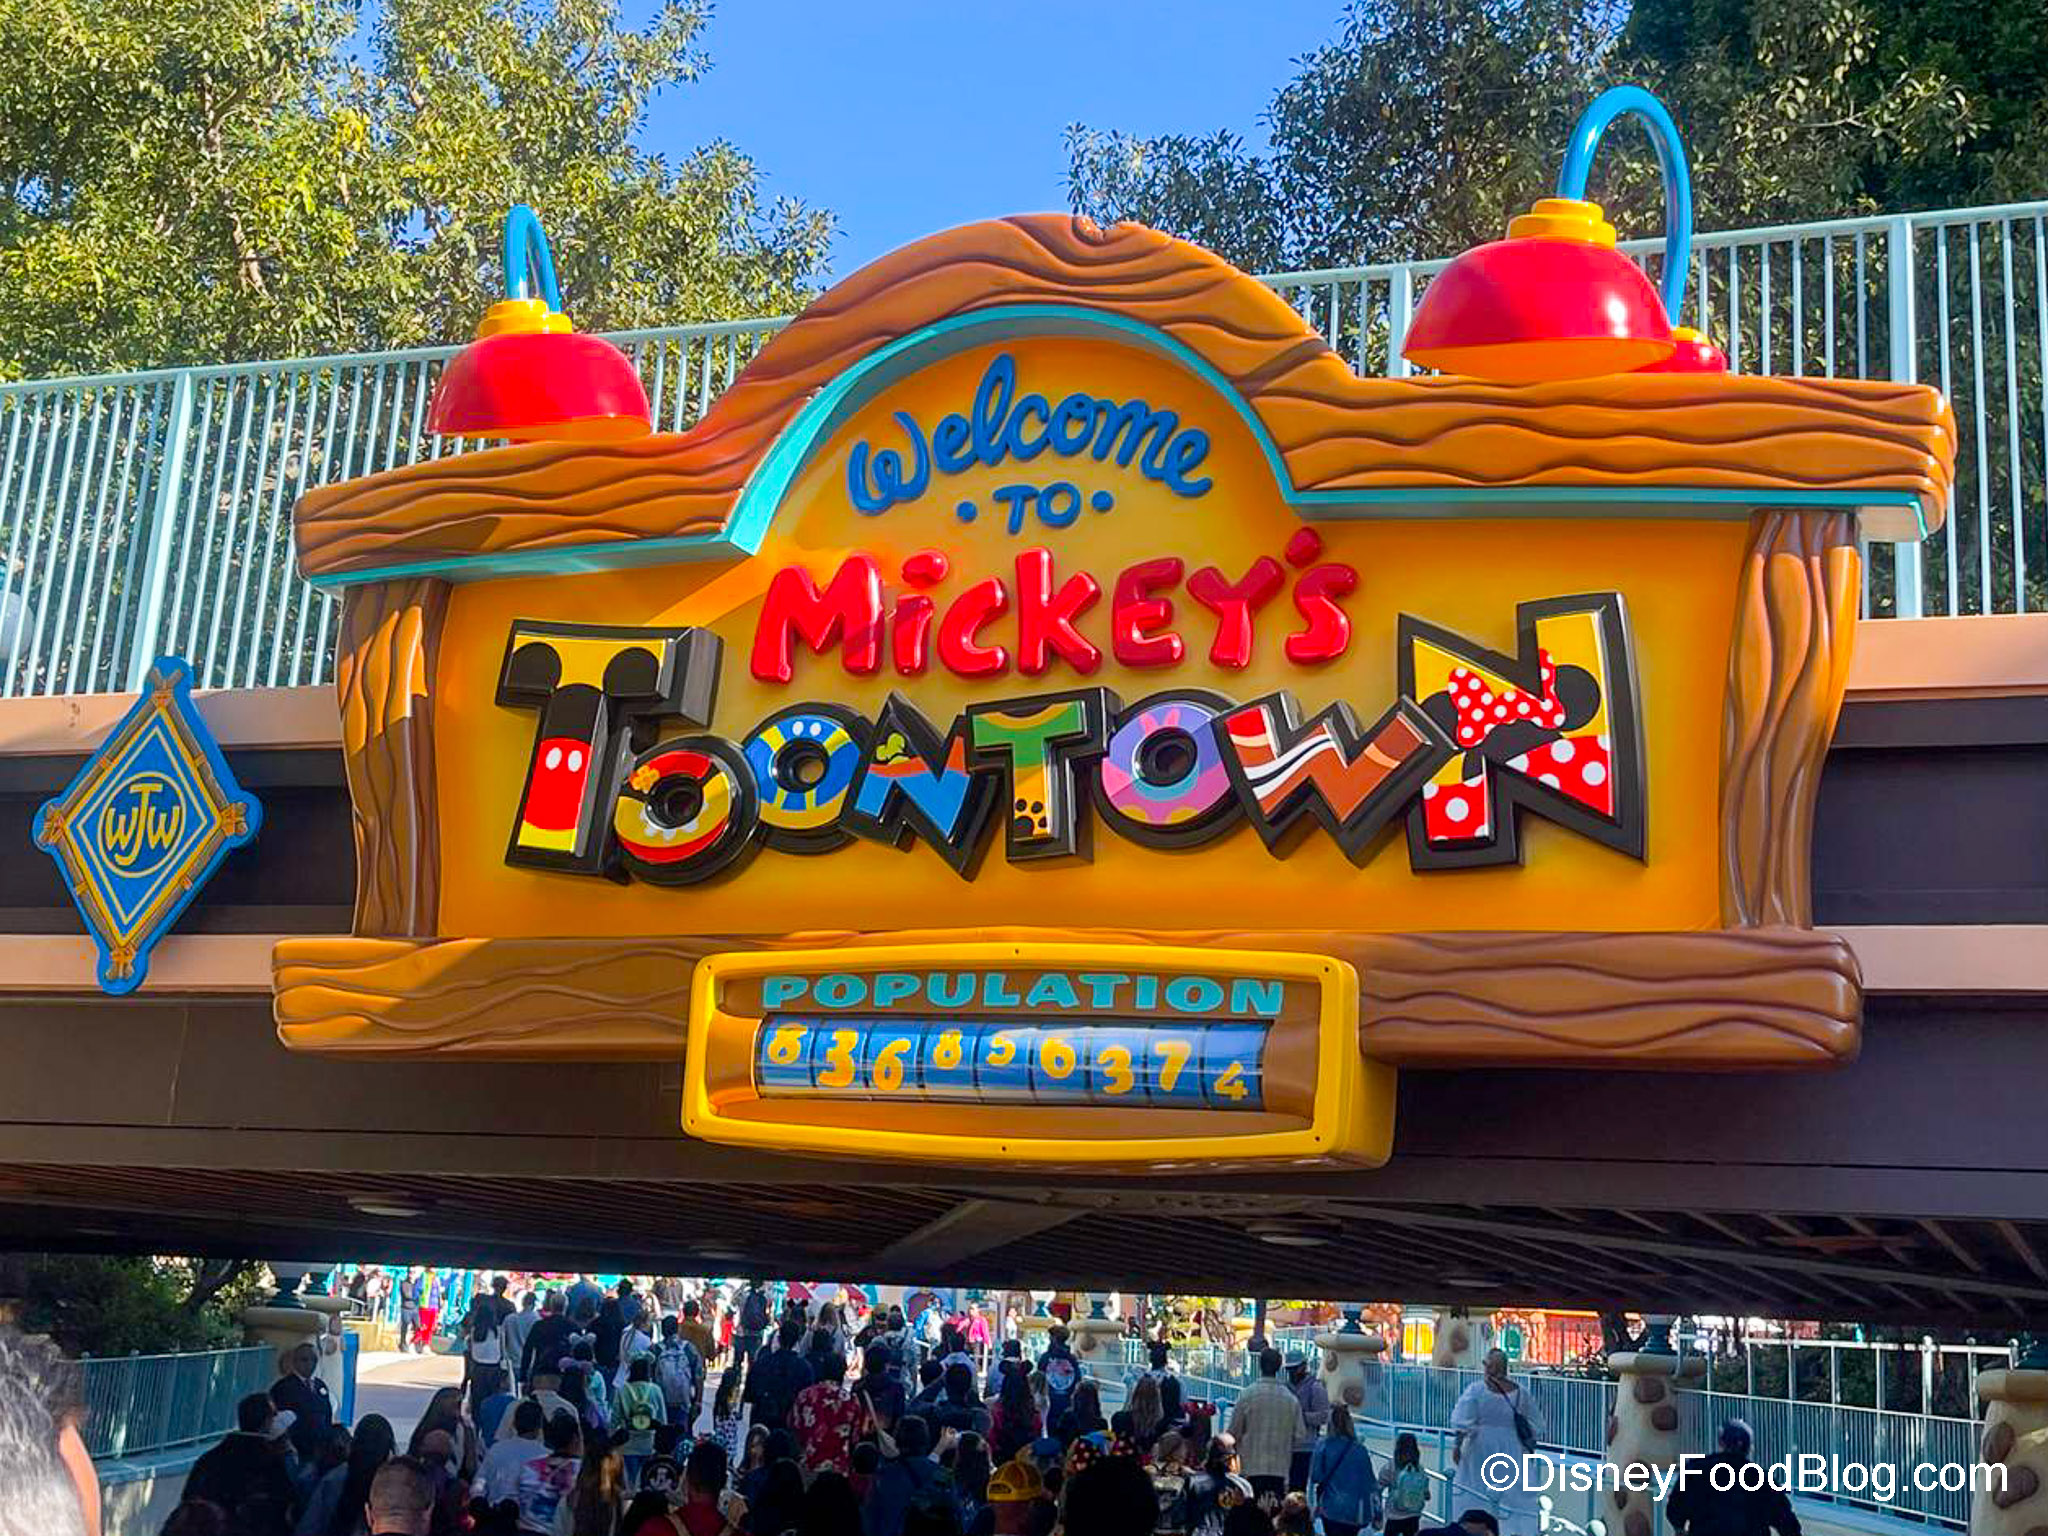 Disneyland Mickey's Toontown REVIEW – Though the attractions in